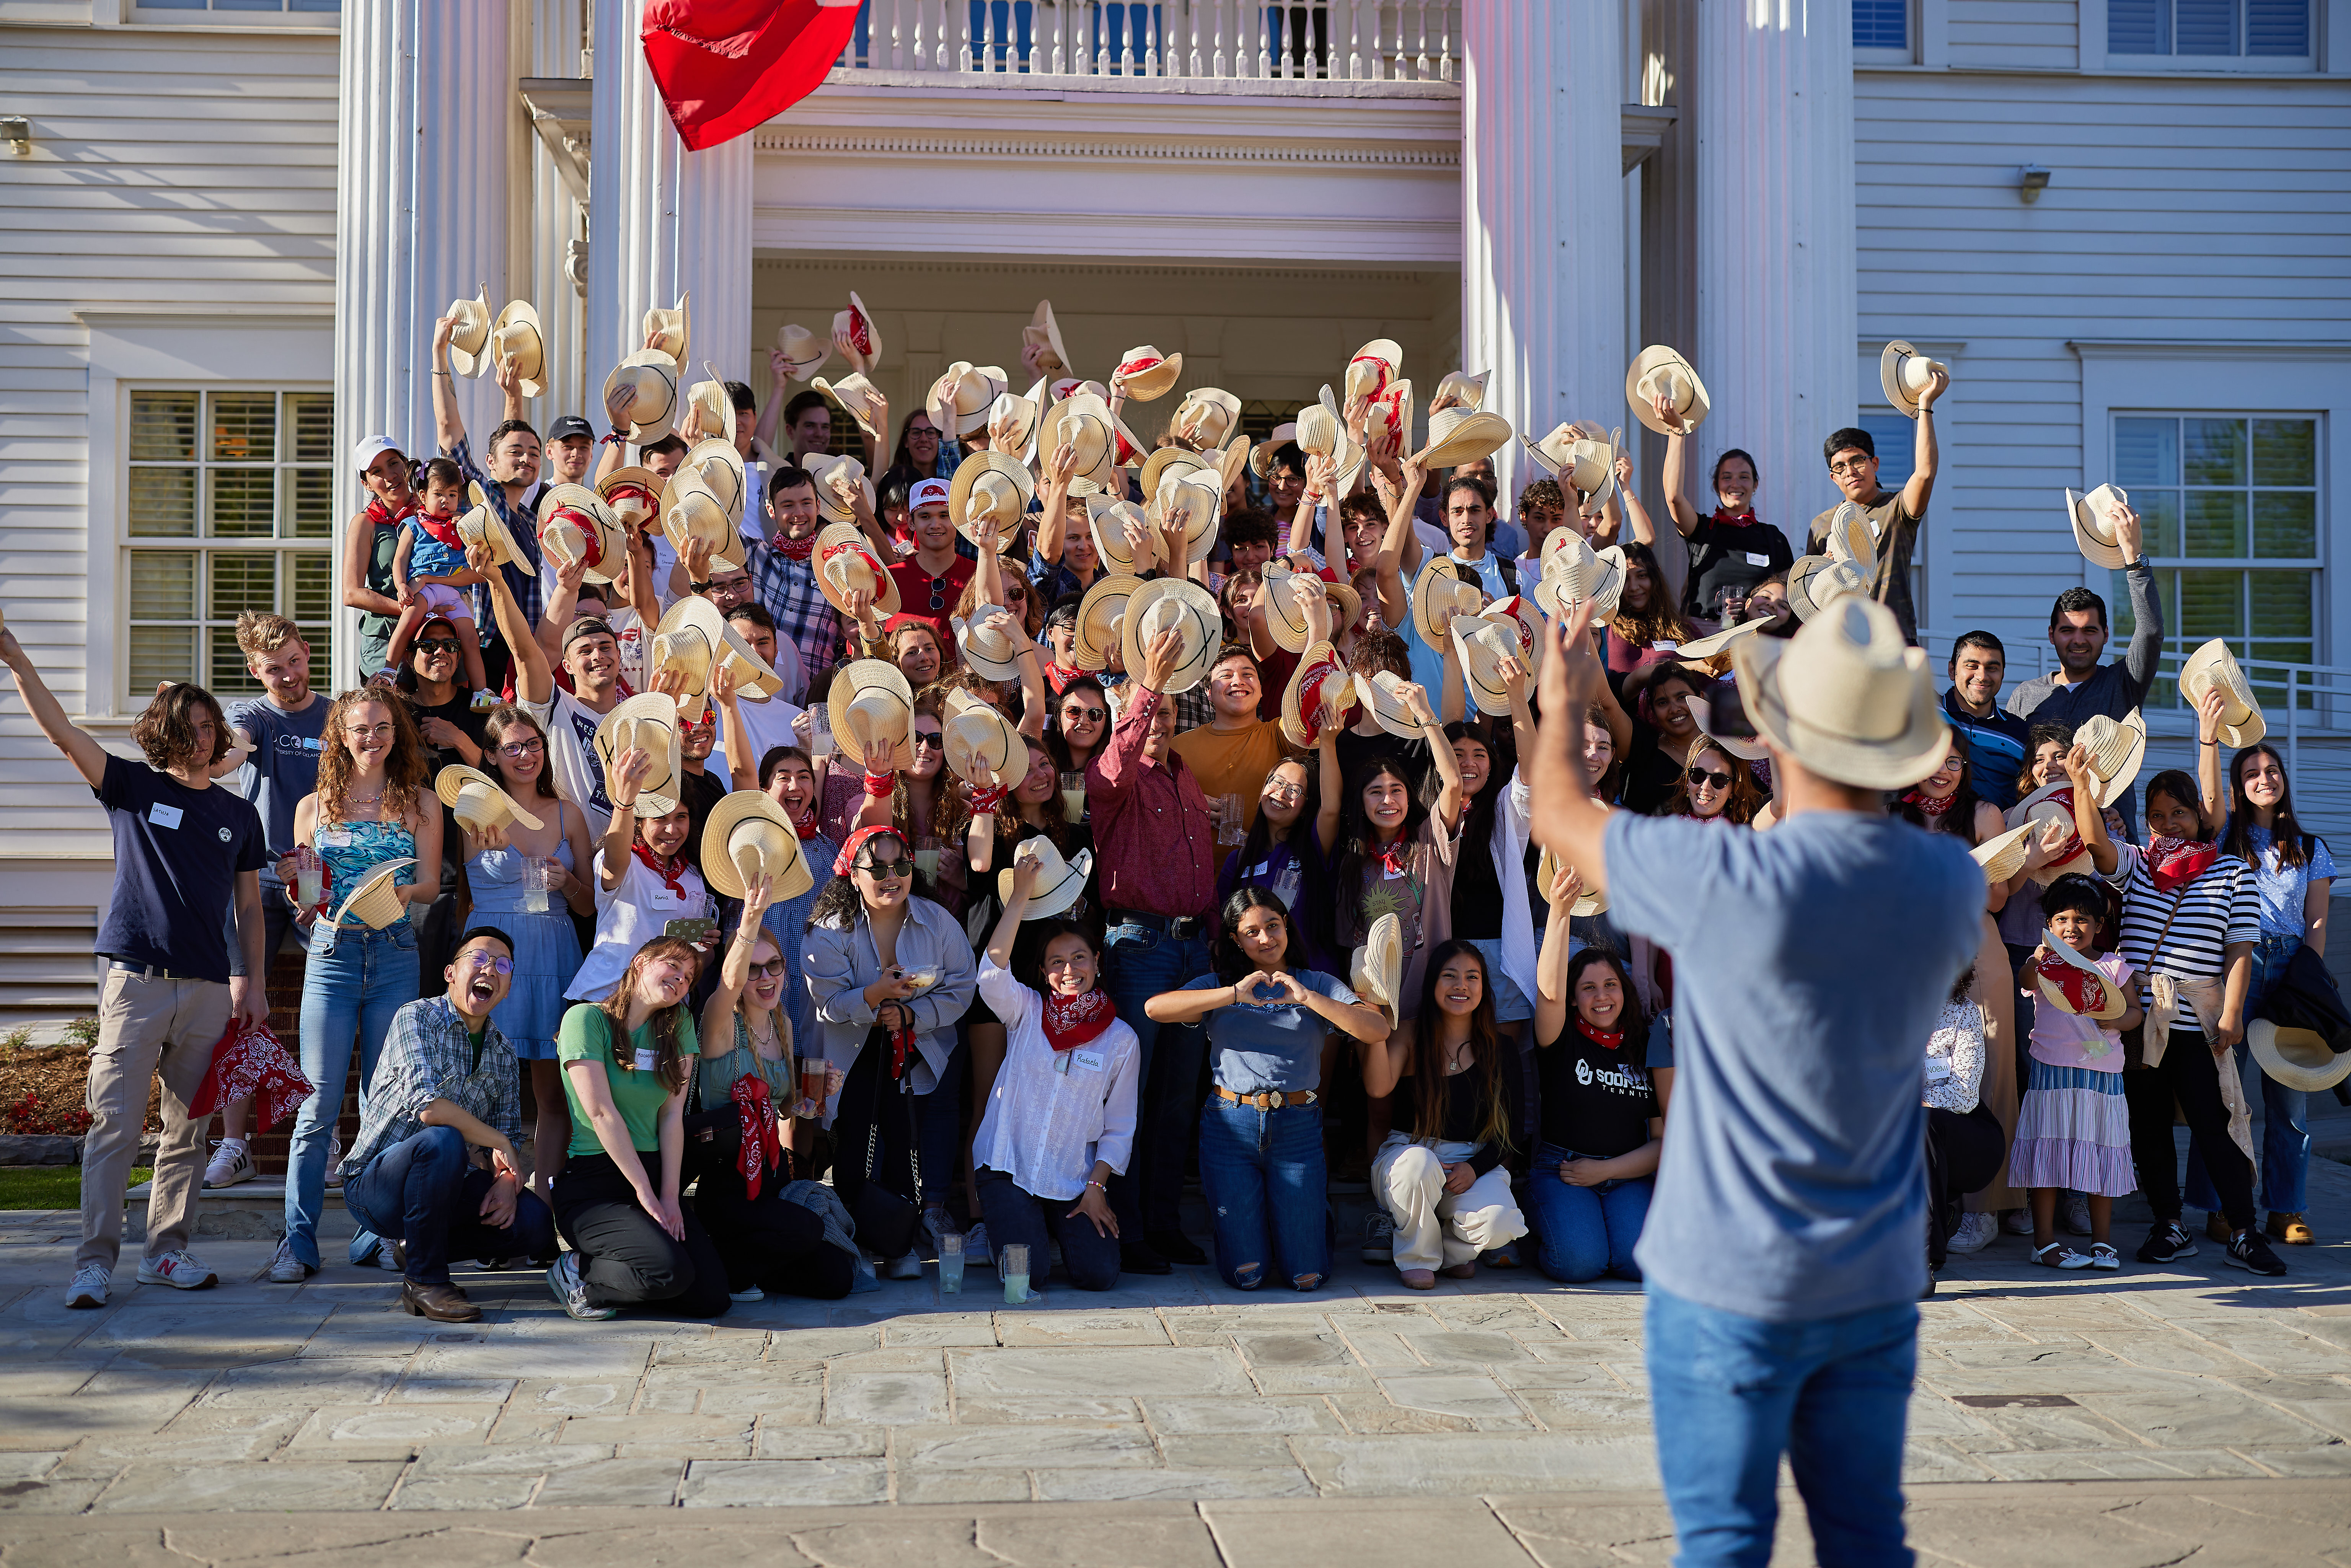 OU Cousins students waving cowboy hats in a group photo.